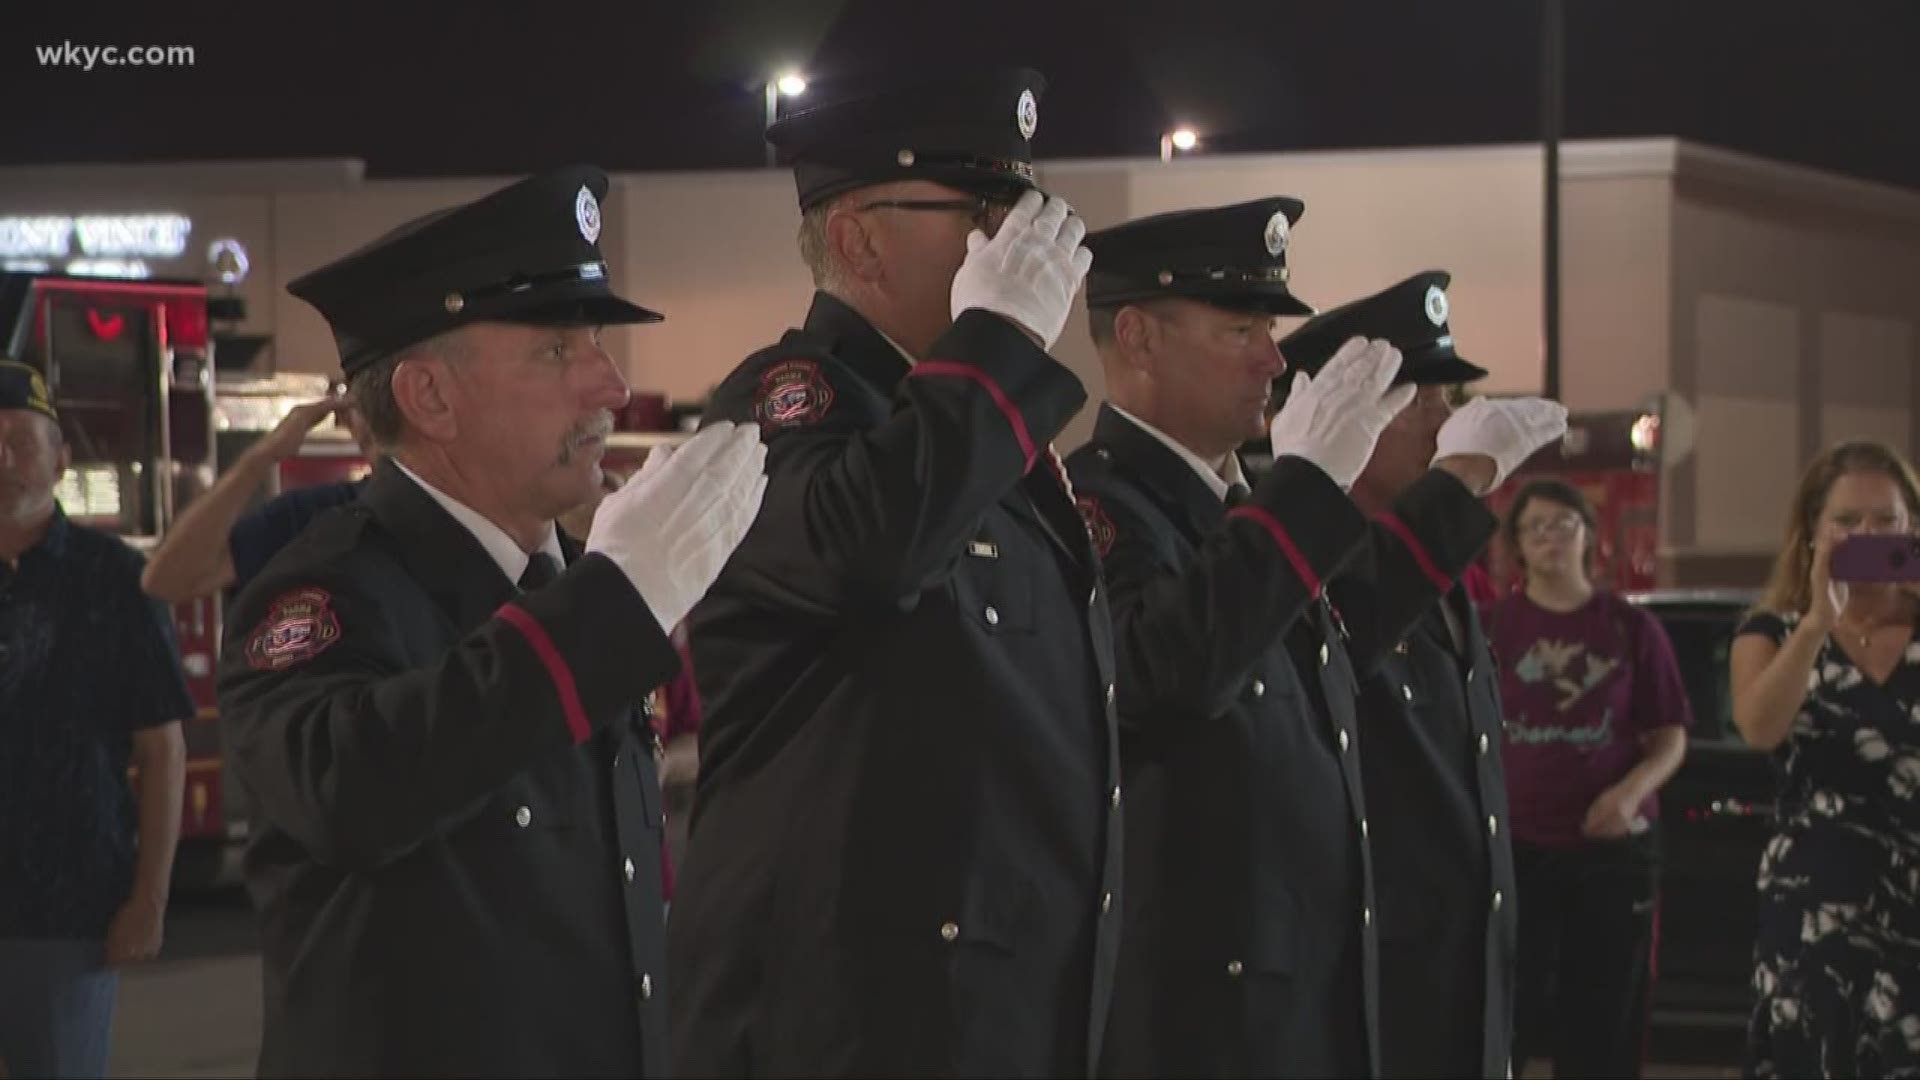 The nation paused to remember the nearly 3000 killed in the terror attacks 18 years ago today. In Parma, firefighters held a ceremony tonight. Among those there, a retired New York City firefighter who was at what was then known as Ground Zero on 9/11.